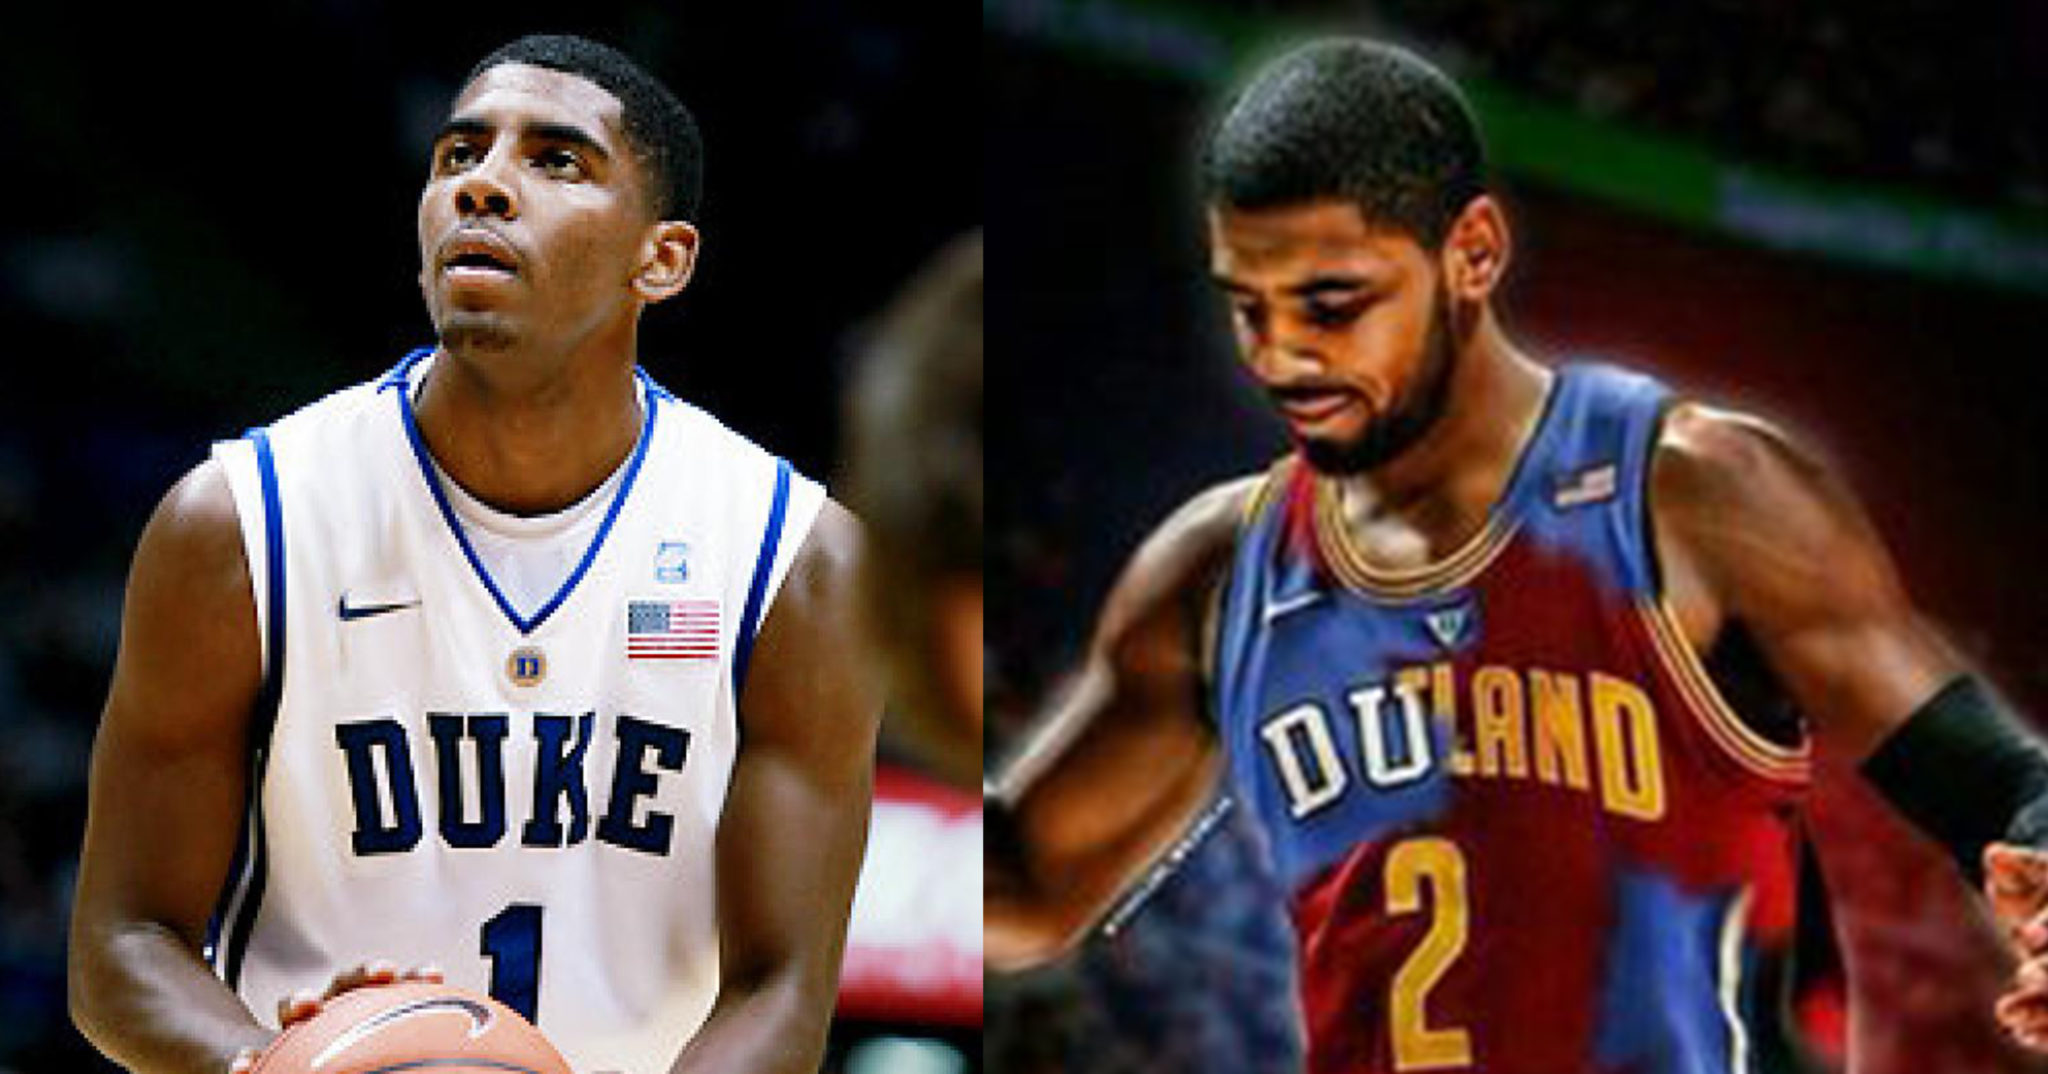 kyrie irving college career